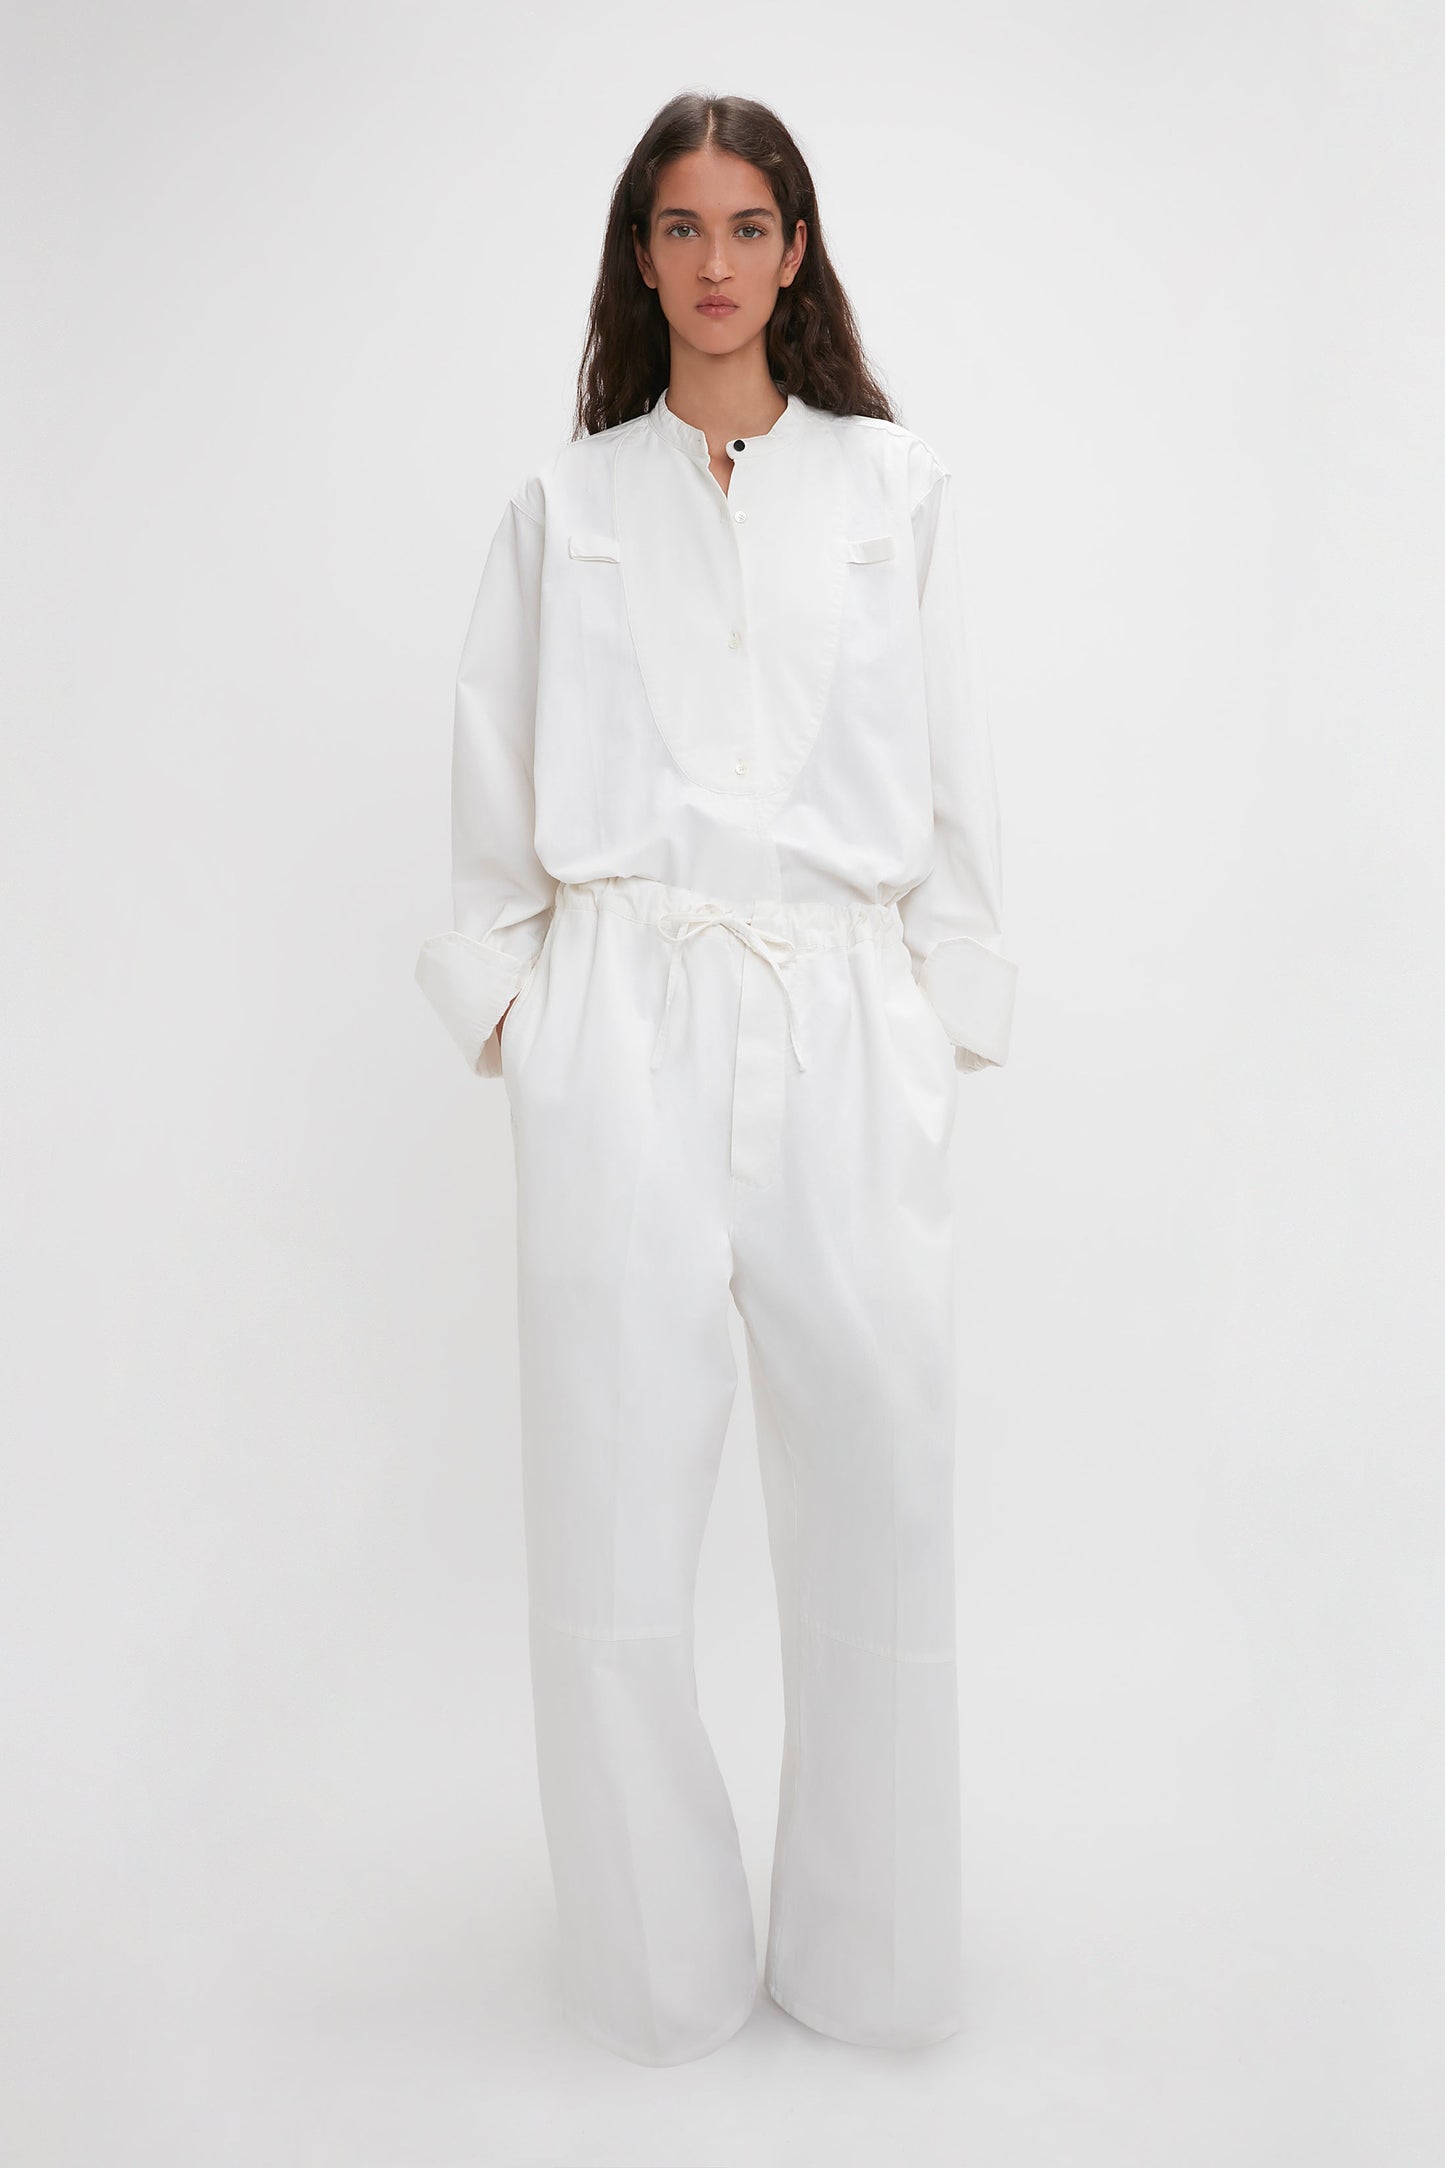 A woman in Victoria Beckham's drawstring pyjama trouser in washed white, with wide-leg trousers and cinched waist, standing against a plain light background.